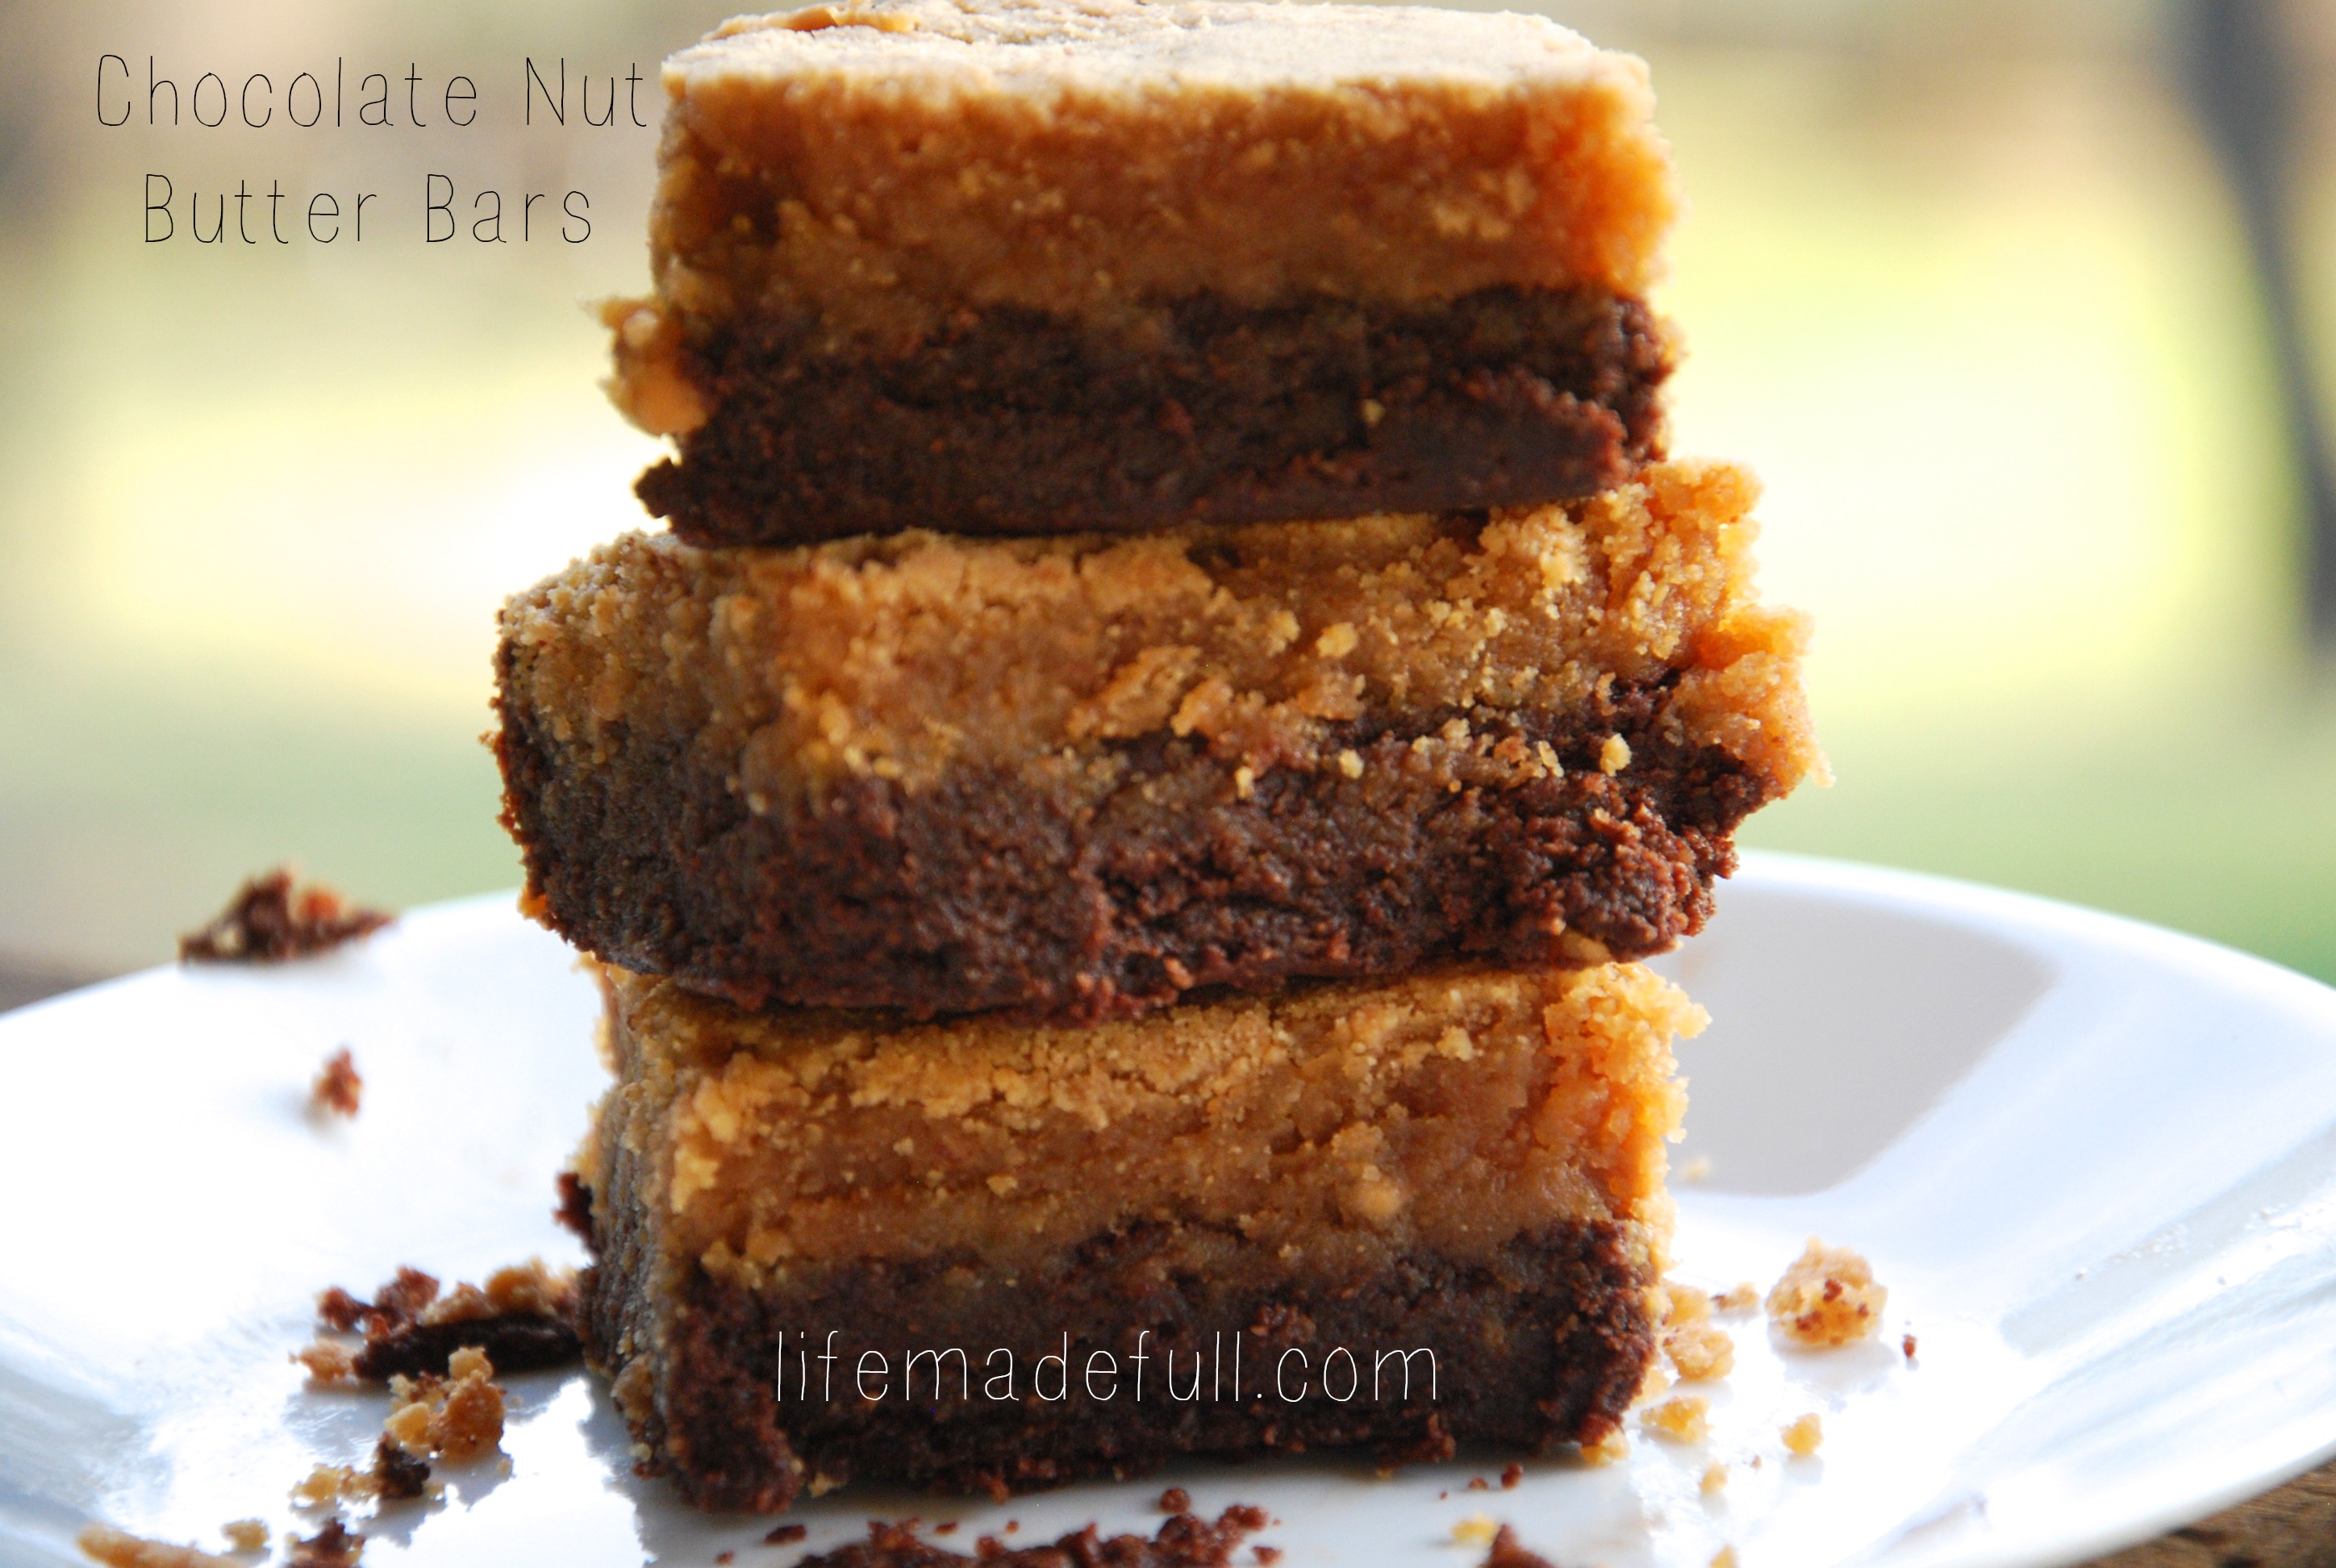 Chocolate Nut Butter Bars